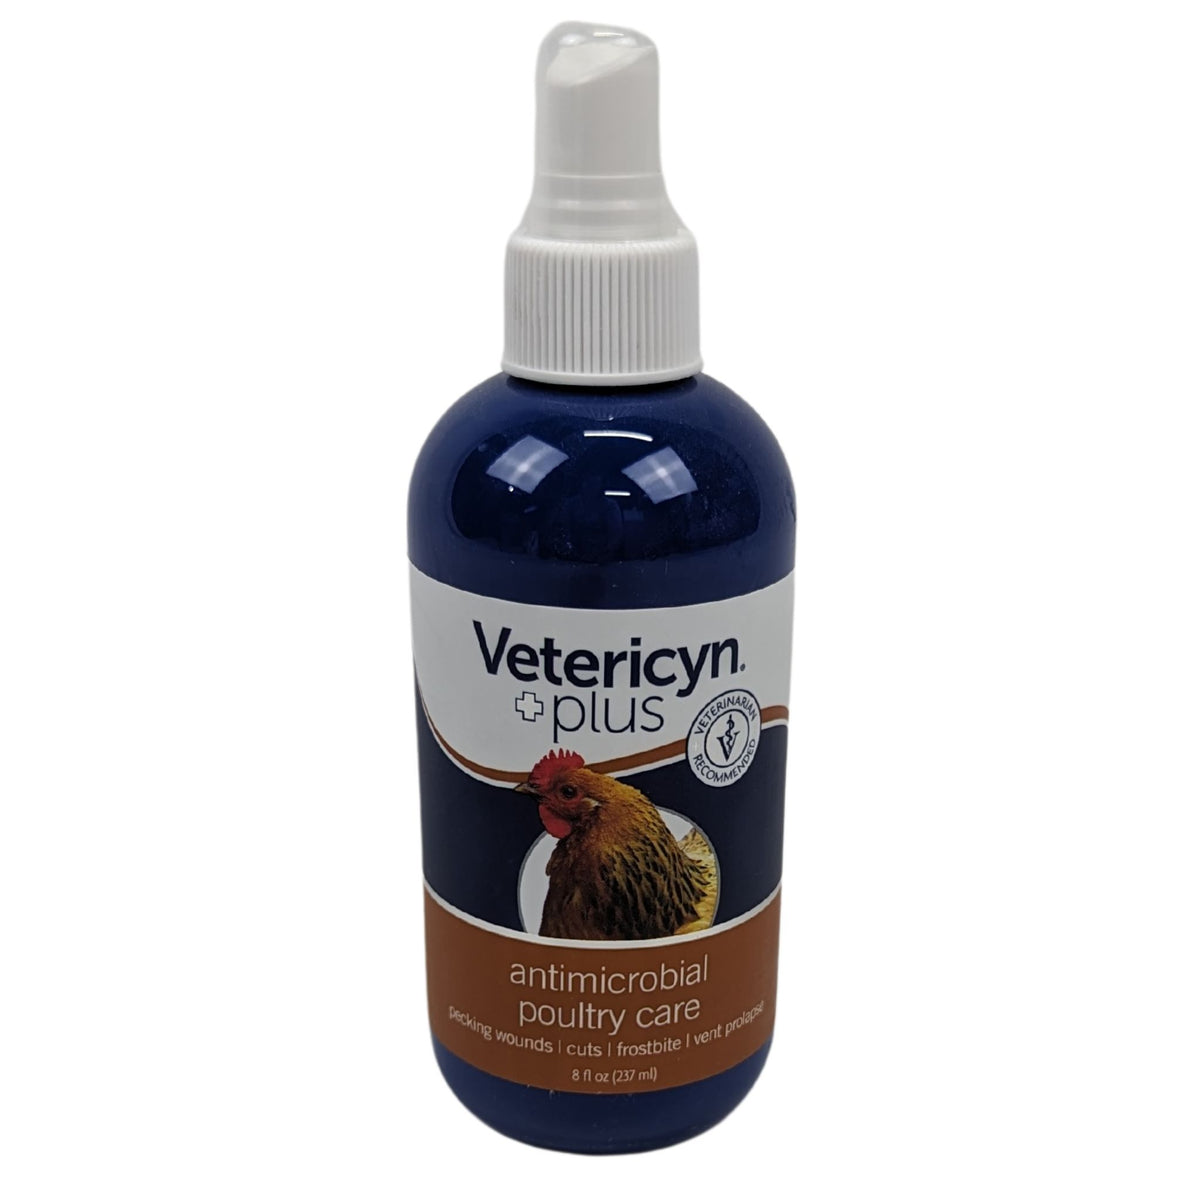 Vetericyn Plus Antimicrobial Poultry Care 8 fl oz